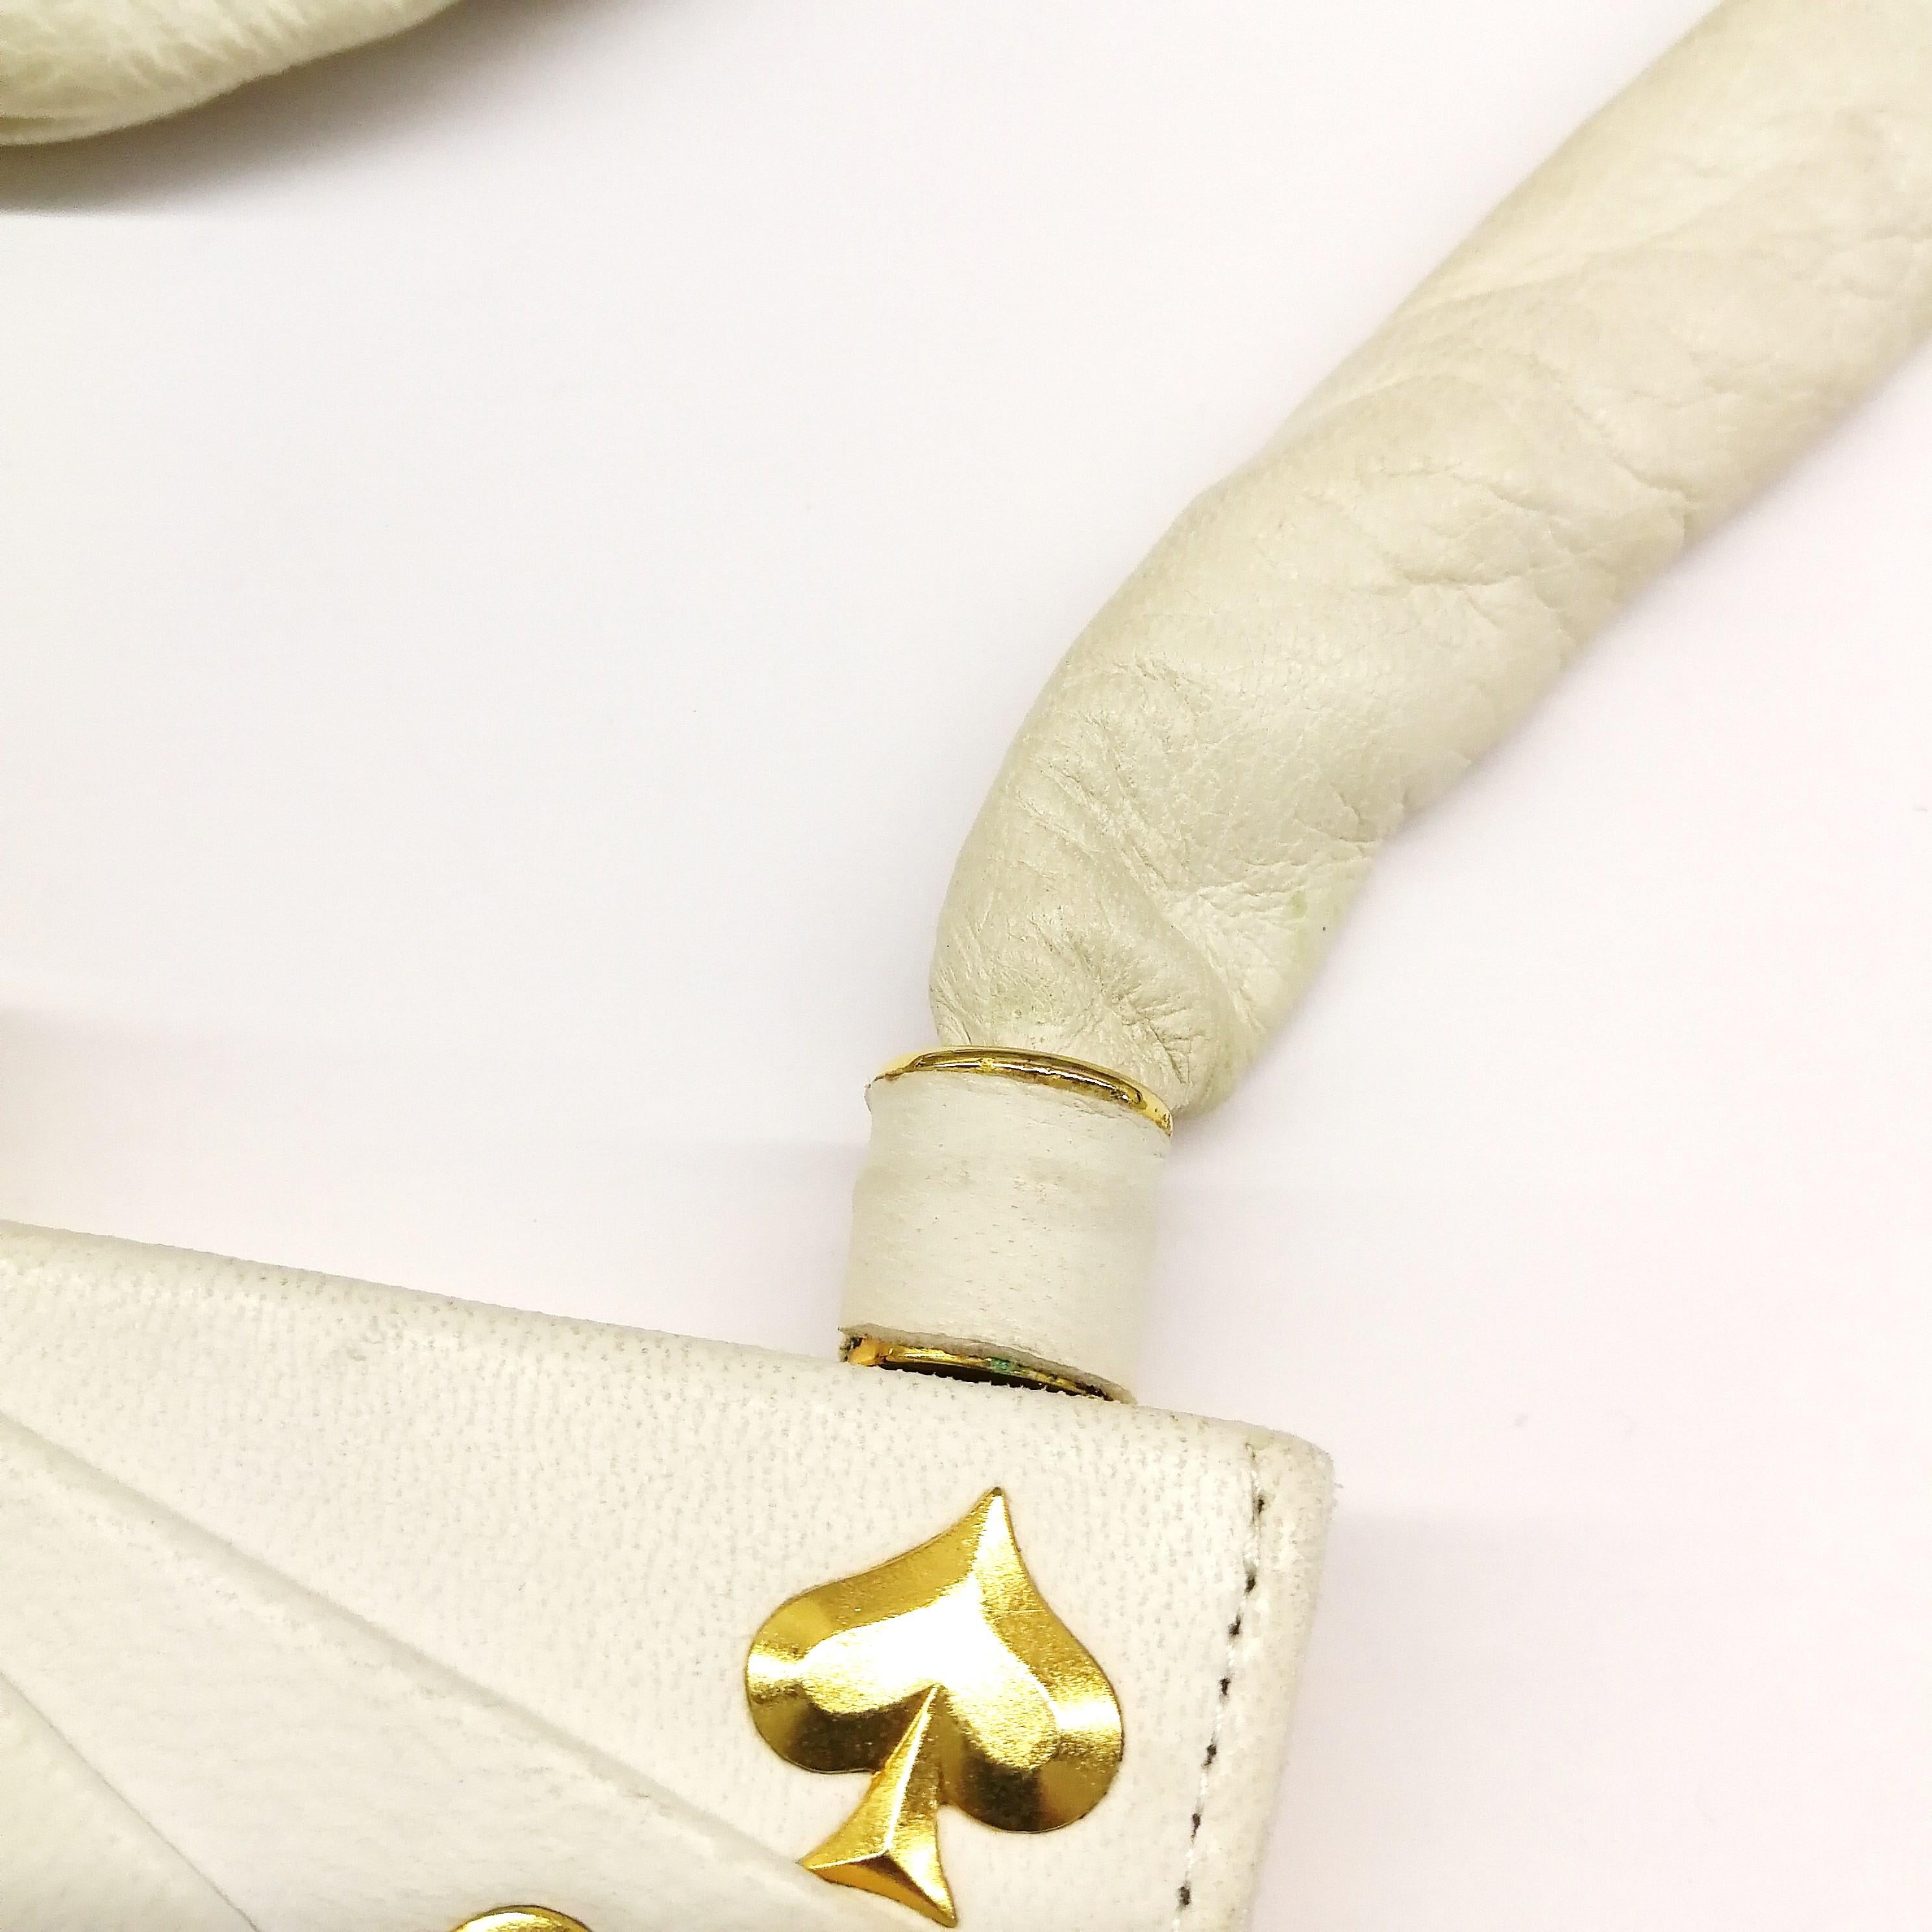 Exquisite Anne-Marie of Paris white leather and gilt 'Hand of Cards' handbag. 5